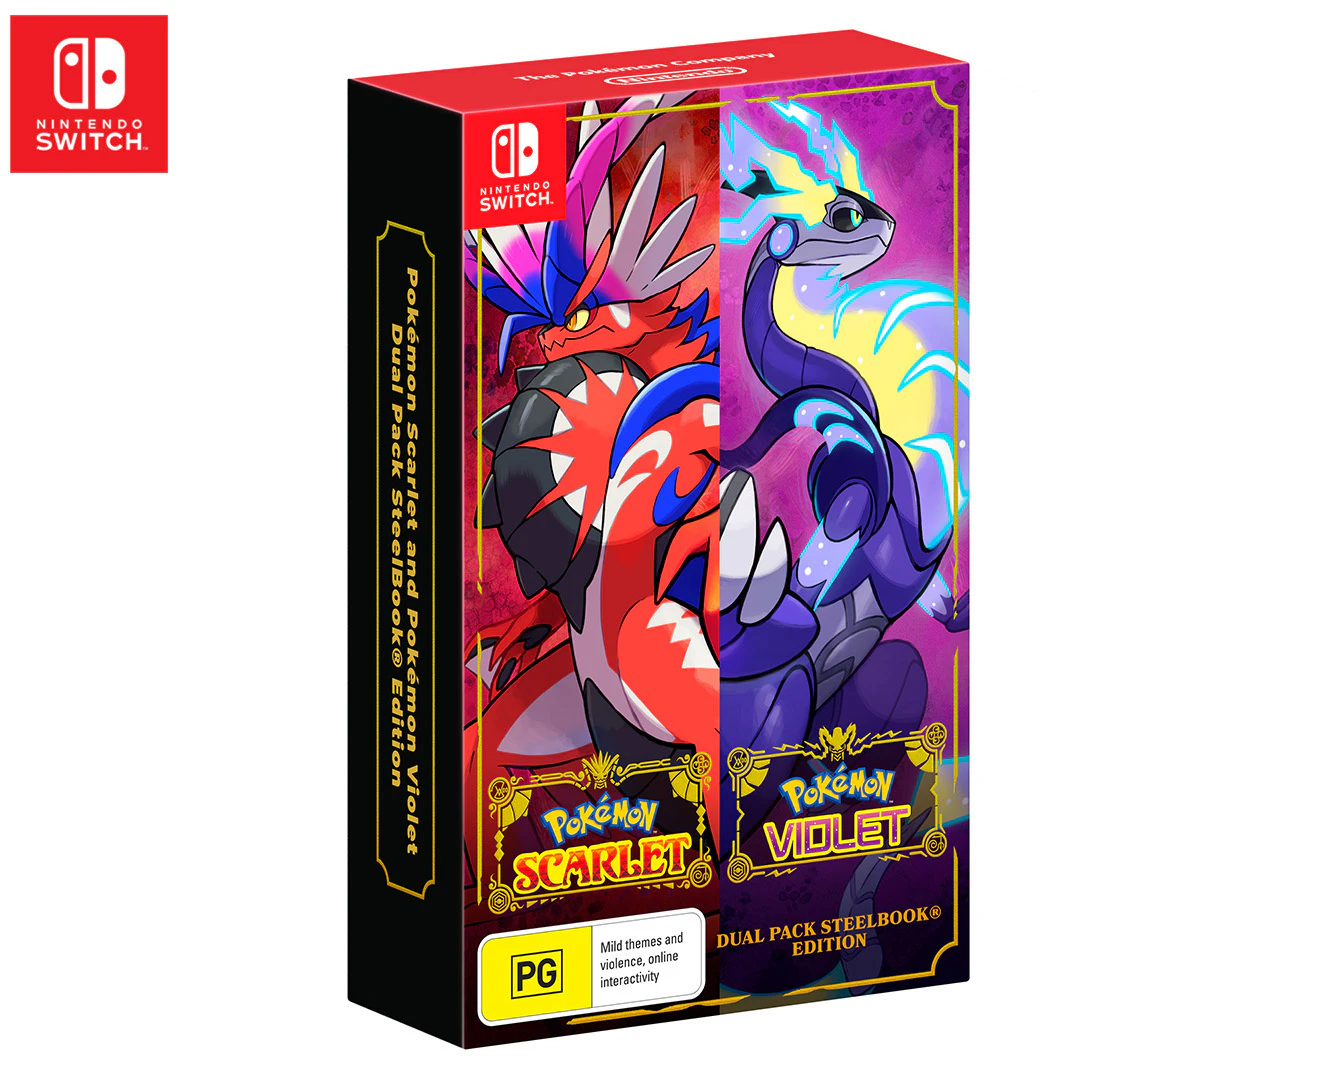 The Pokémon Sword and Shield Steelbook Will Be a Target Exclusive